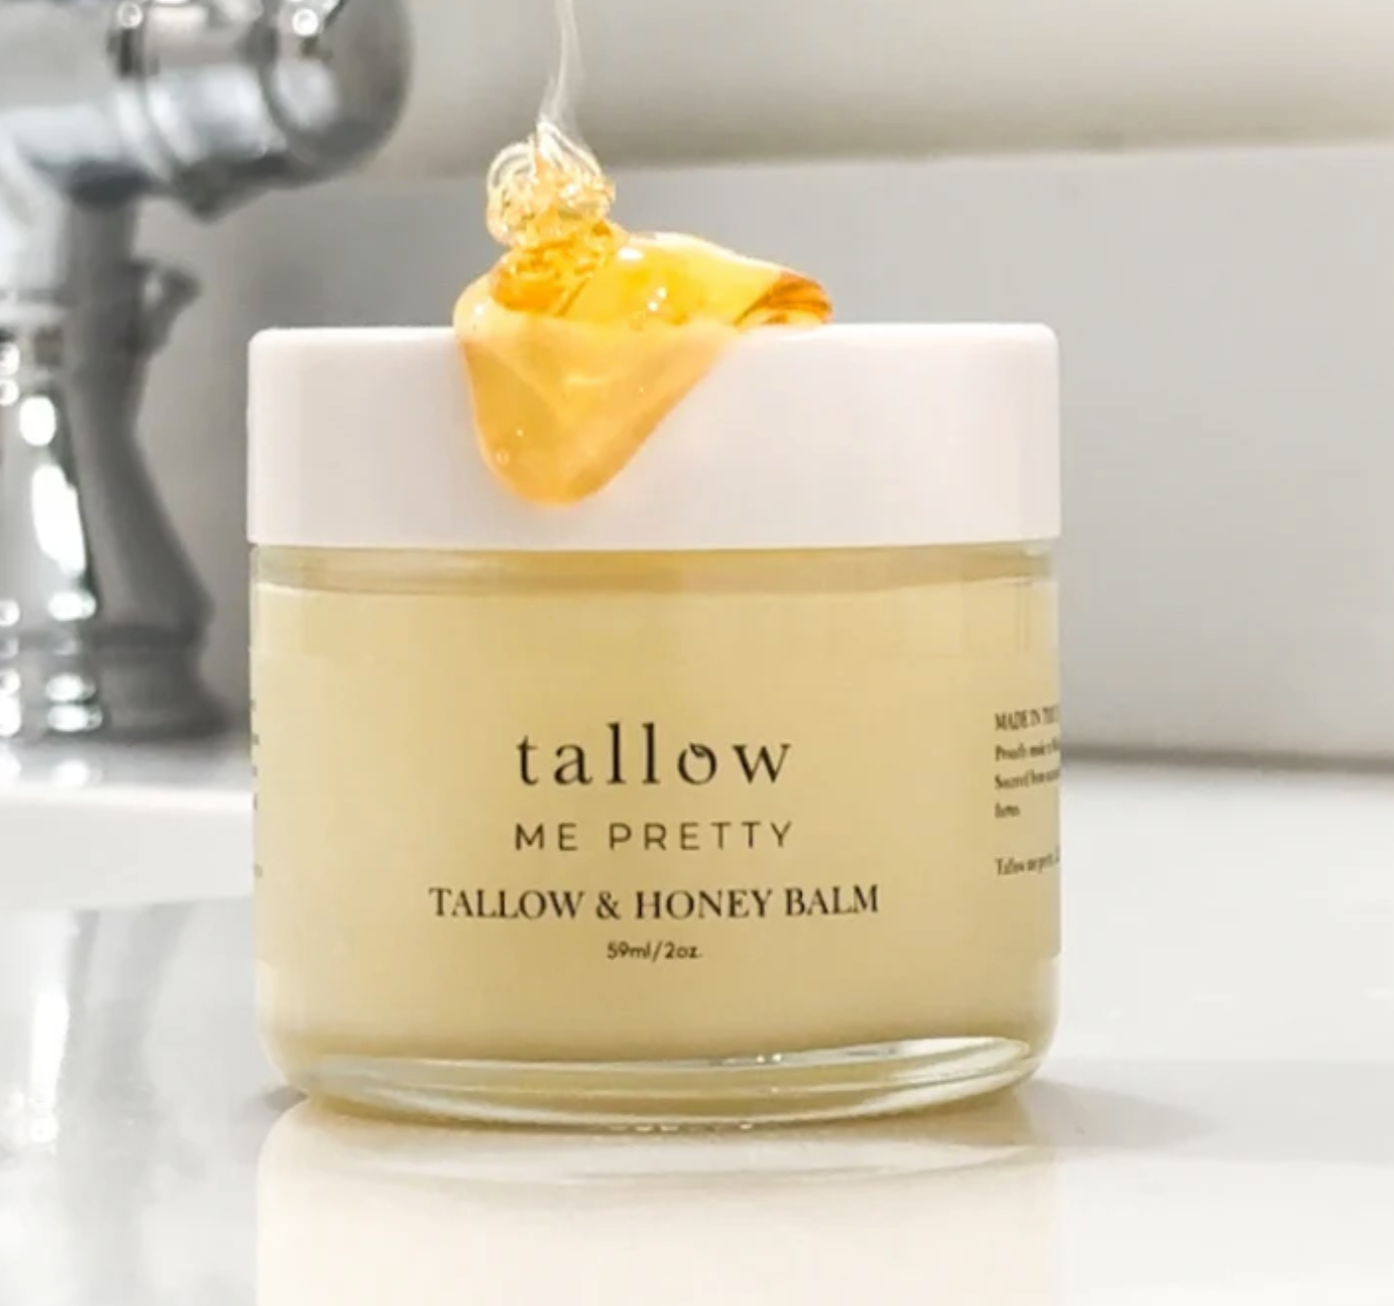 Tallow and Honey Balm